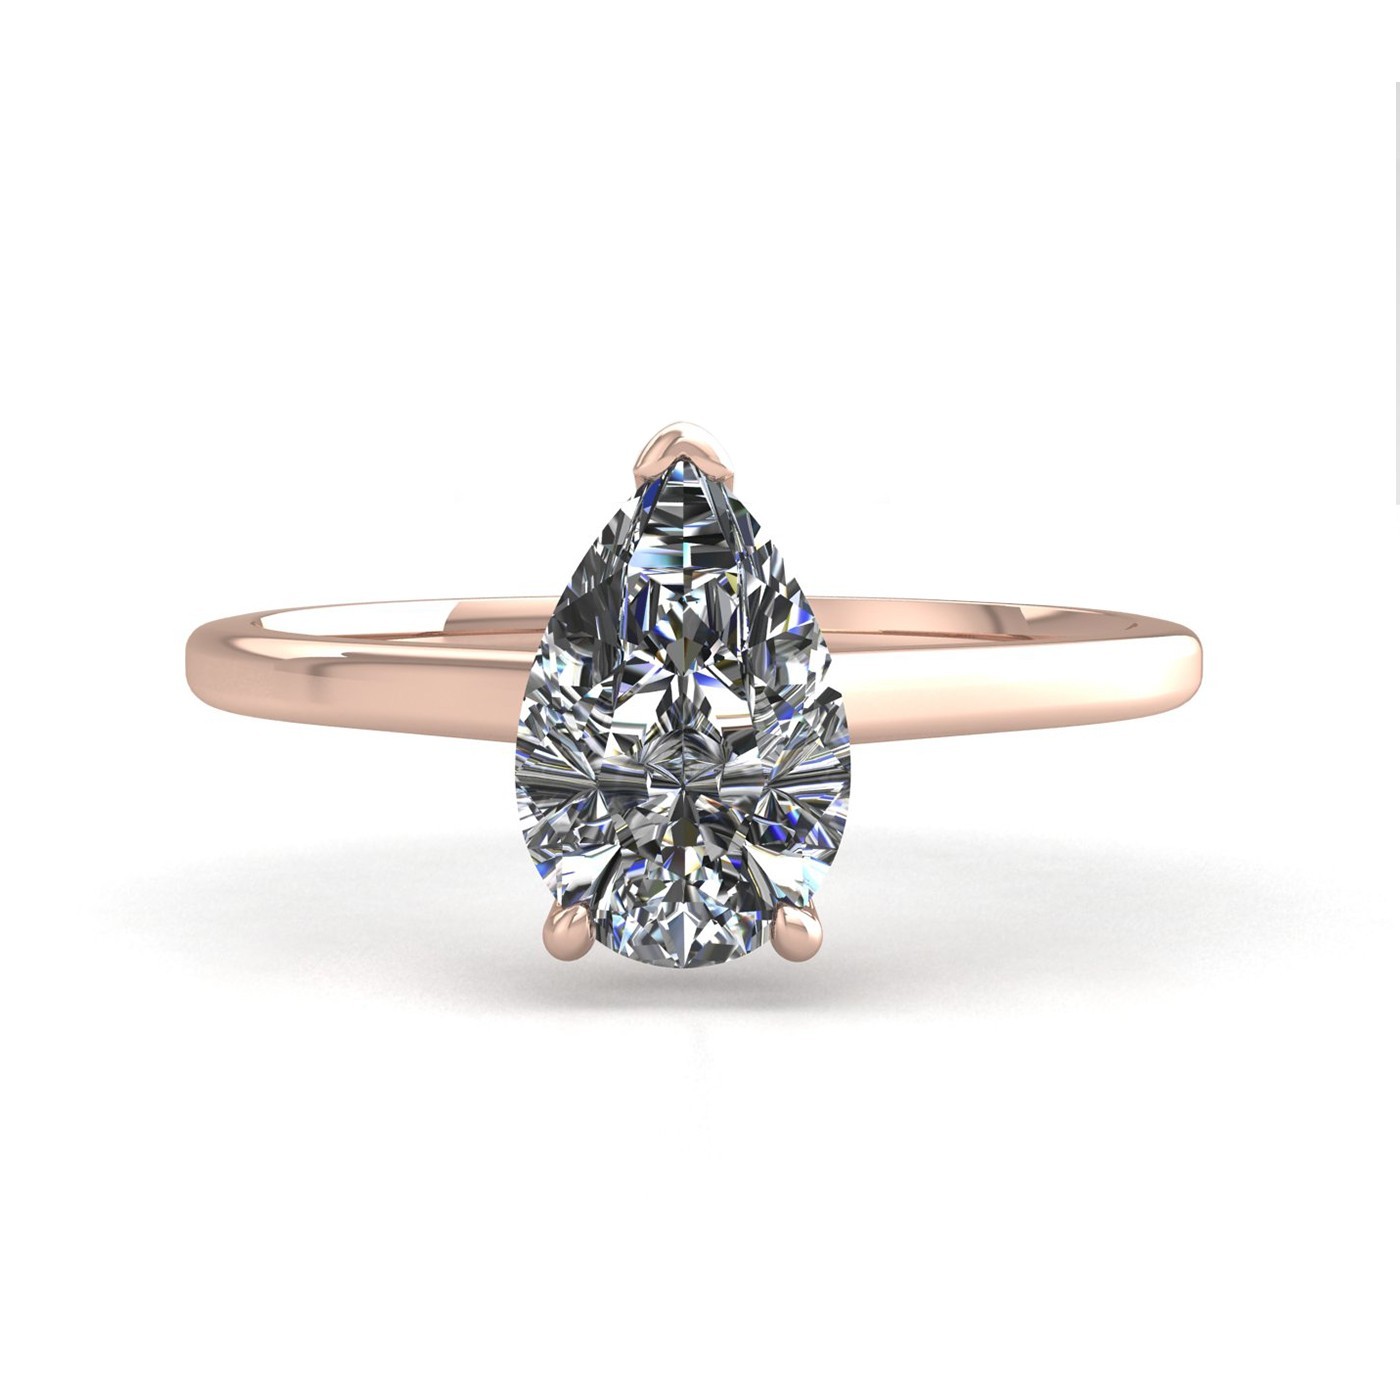 18k rose gold  1,50 ct 3 prongs solitaire pear cut diamond engagement ring with whisper thin band Photos & images